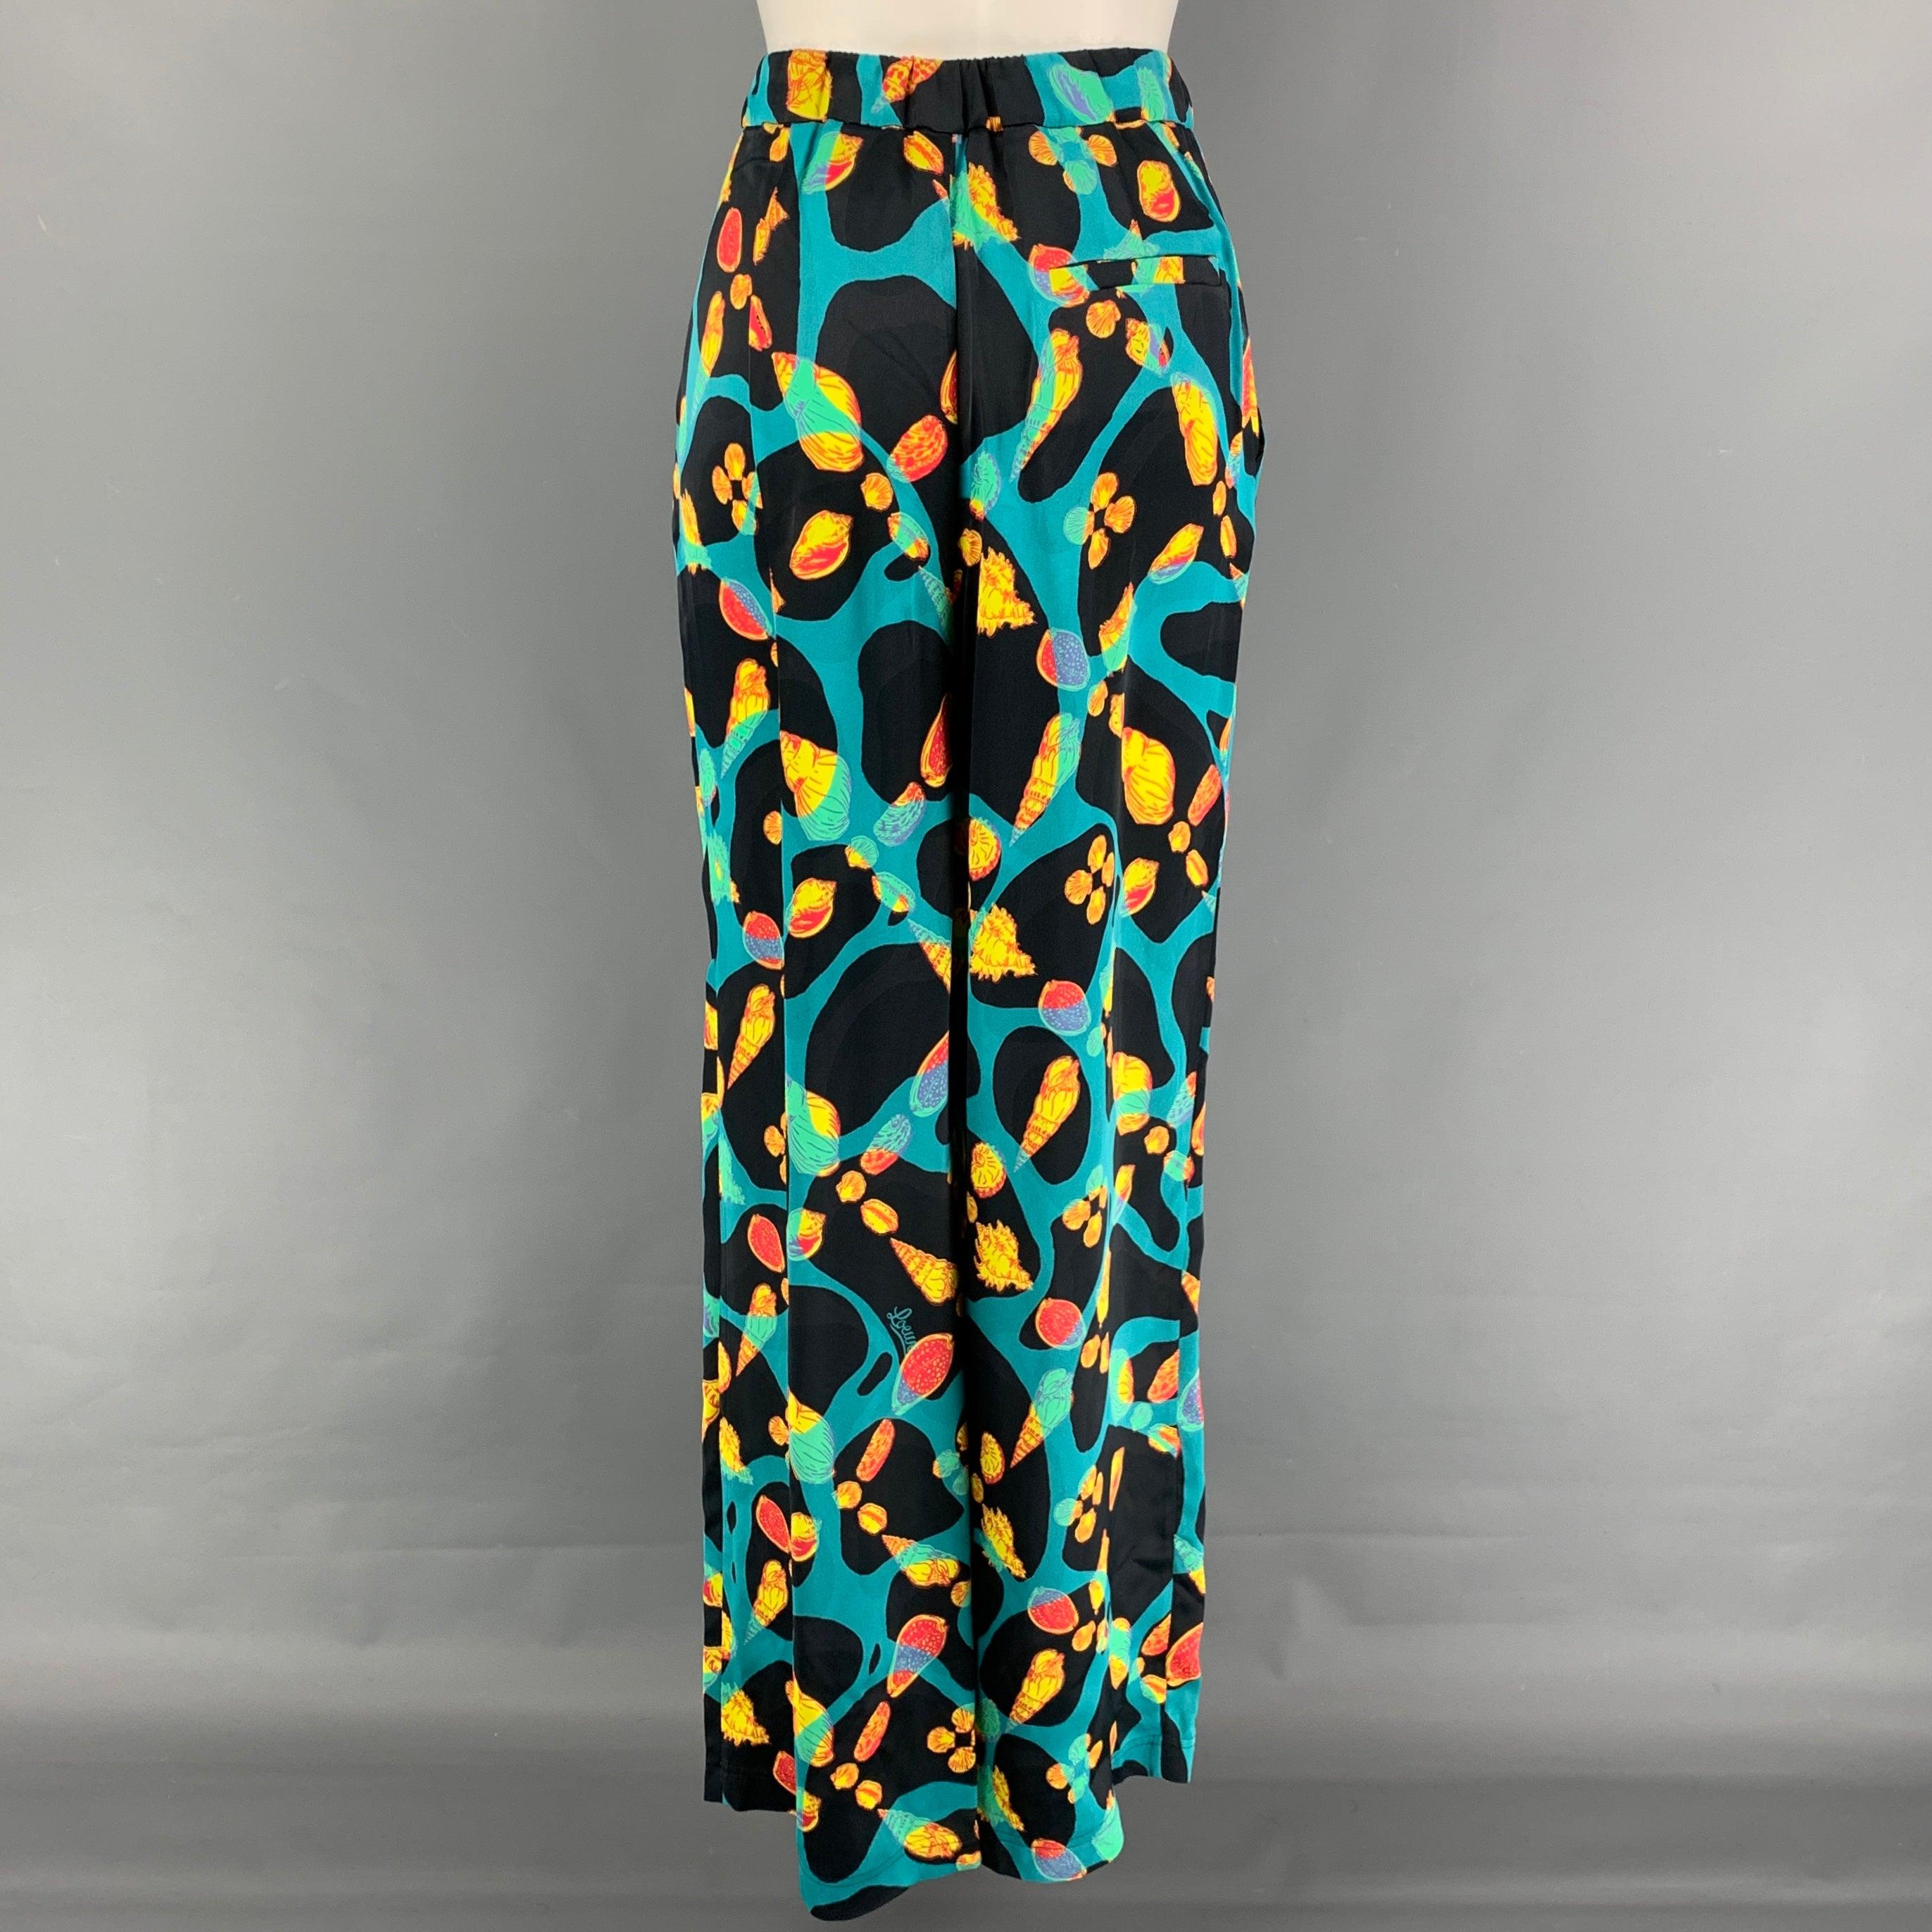 LOEWE casual pants comes in a multi-color satin viscose featuring all-over shell print with LOEWE 'Paula's Ibiza' logos, relaxed fit, high rise, and a elastic waist.
Very Good
Pre-Owned Condition. 

Marked:   XS 

Measurements: 
  Waist: 28 inches 